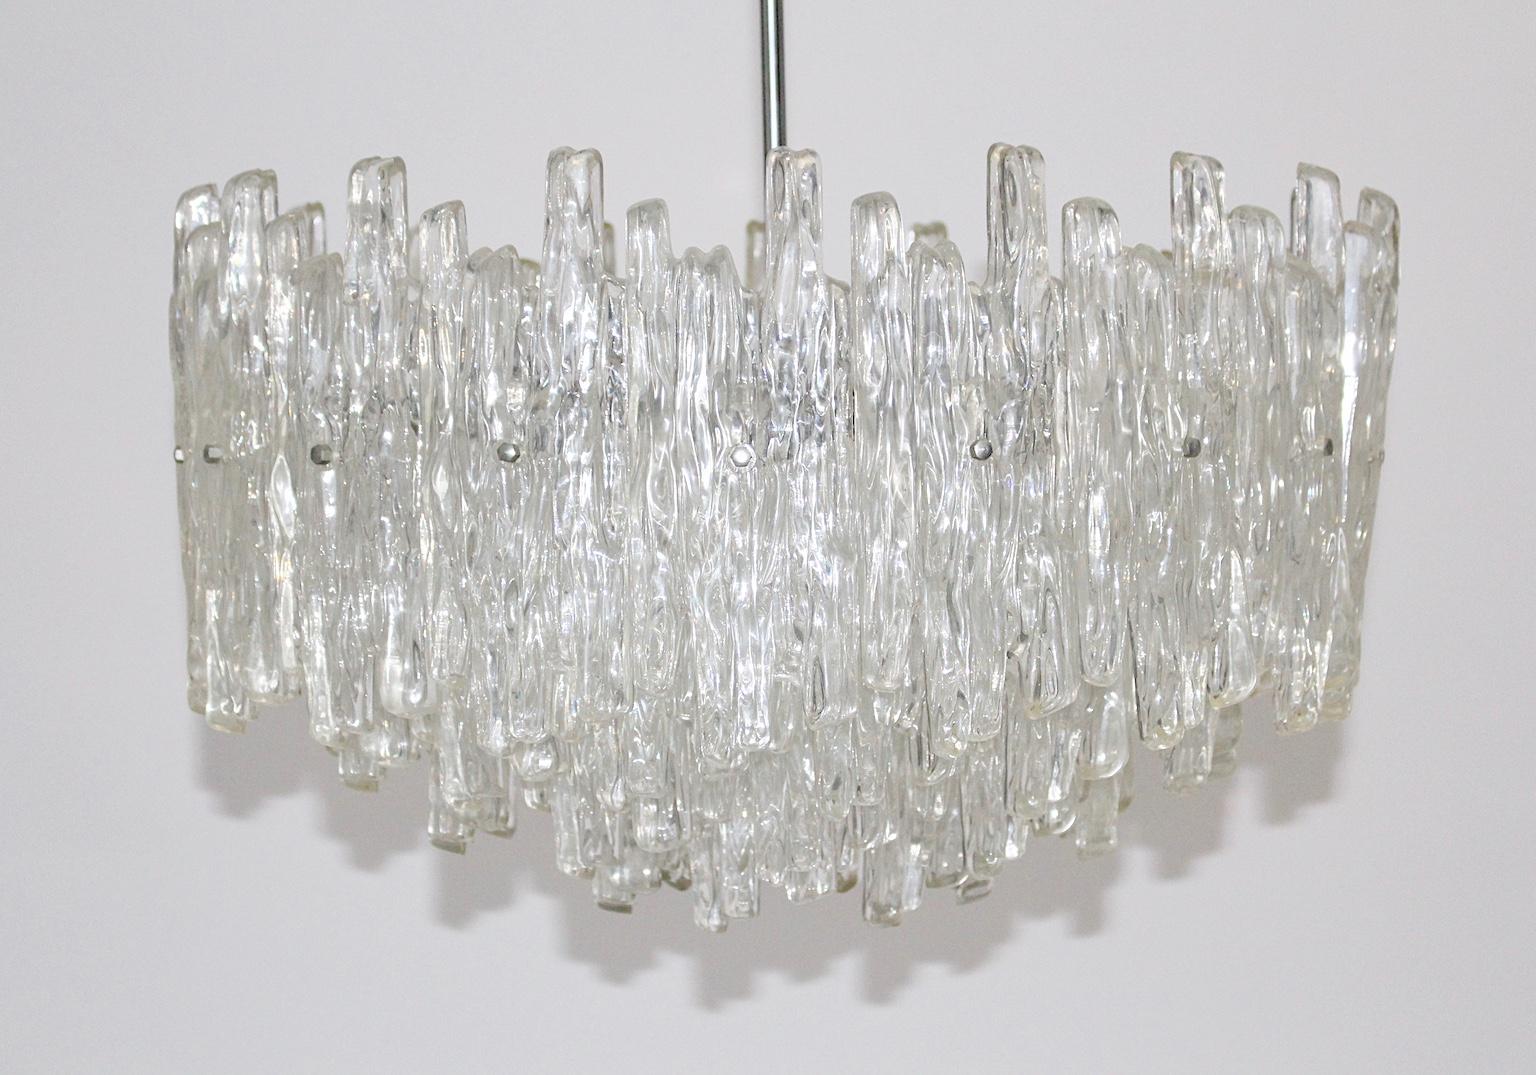  Mid-Century Modern vintage Lucite chandelier or pendant, which was designed and manufactured in Austria, 1960s.
While the lamp shade was made out of many Lucite pieces in organic form, a chromed stem and the details are made of nickel-plated and